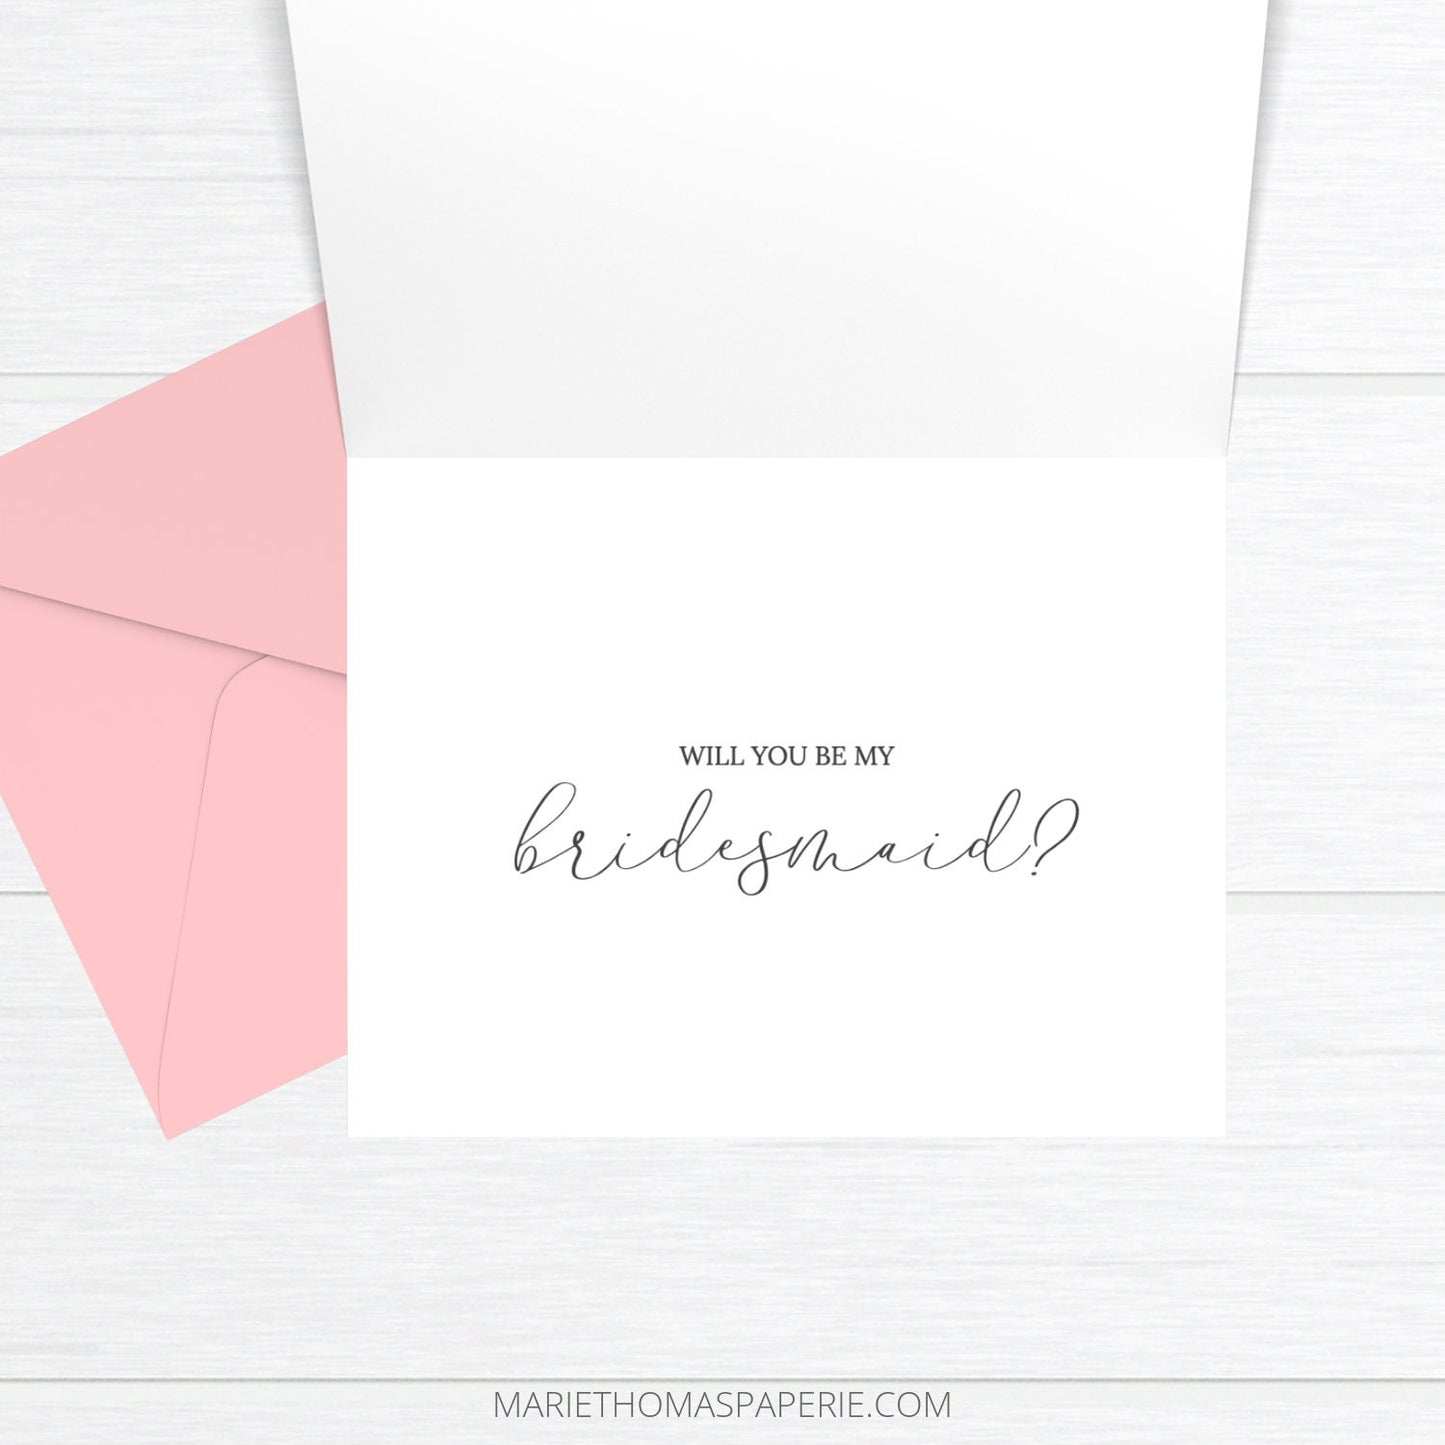 Editable  Bridesmaid Proposal Card Will You Be My Bridesmaid Card Maid of Honor Proposal Maid of Honor Card Asking Bridesmaid Template